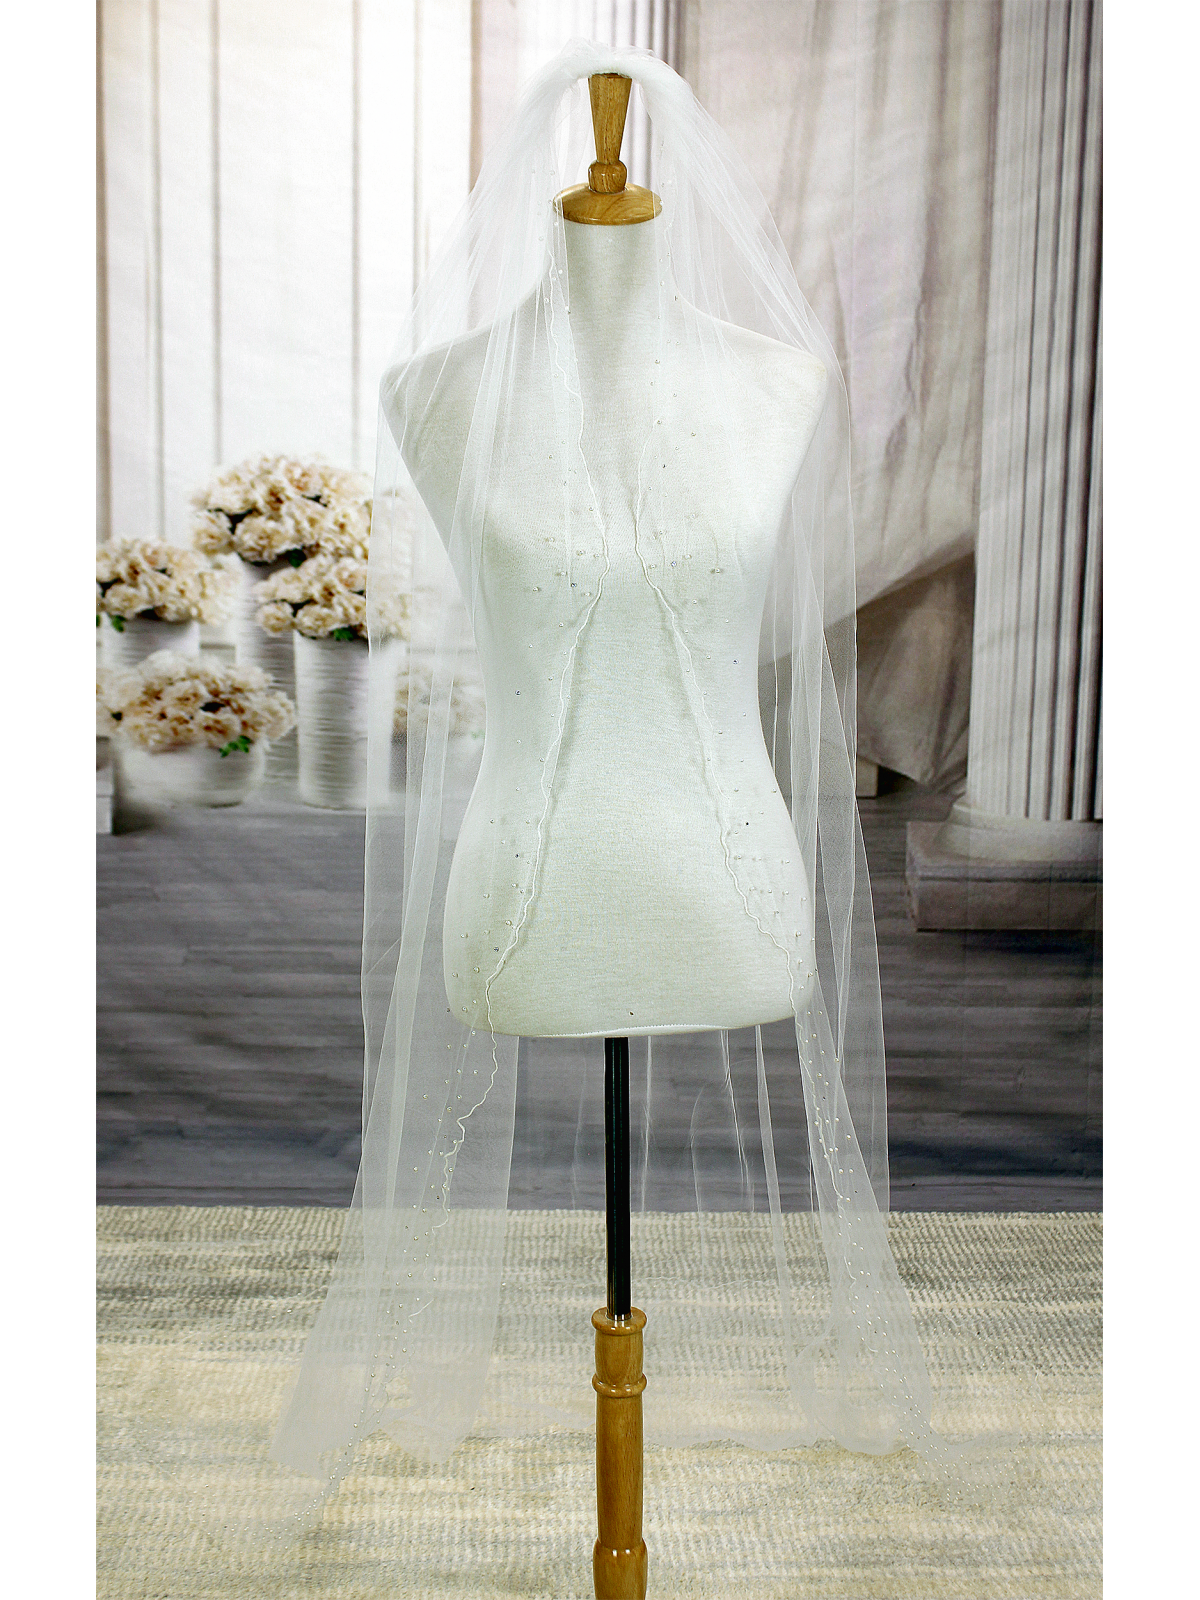 Long Veil - woven trim with beads and pearls embellishment - 108" - VL-V103-108IV